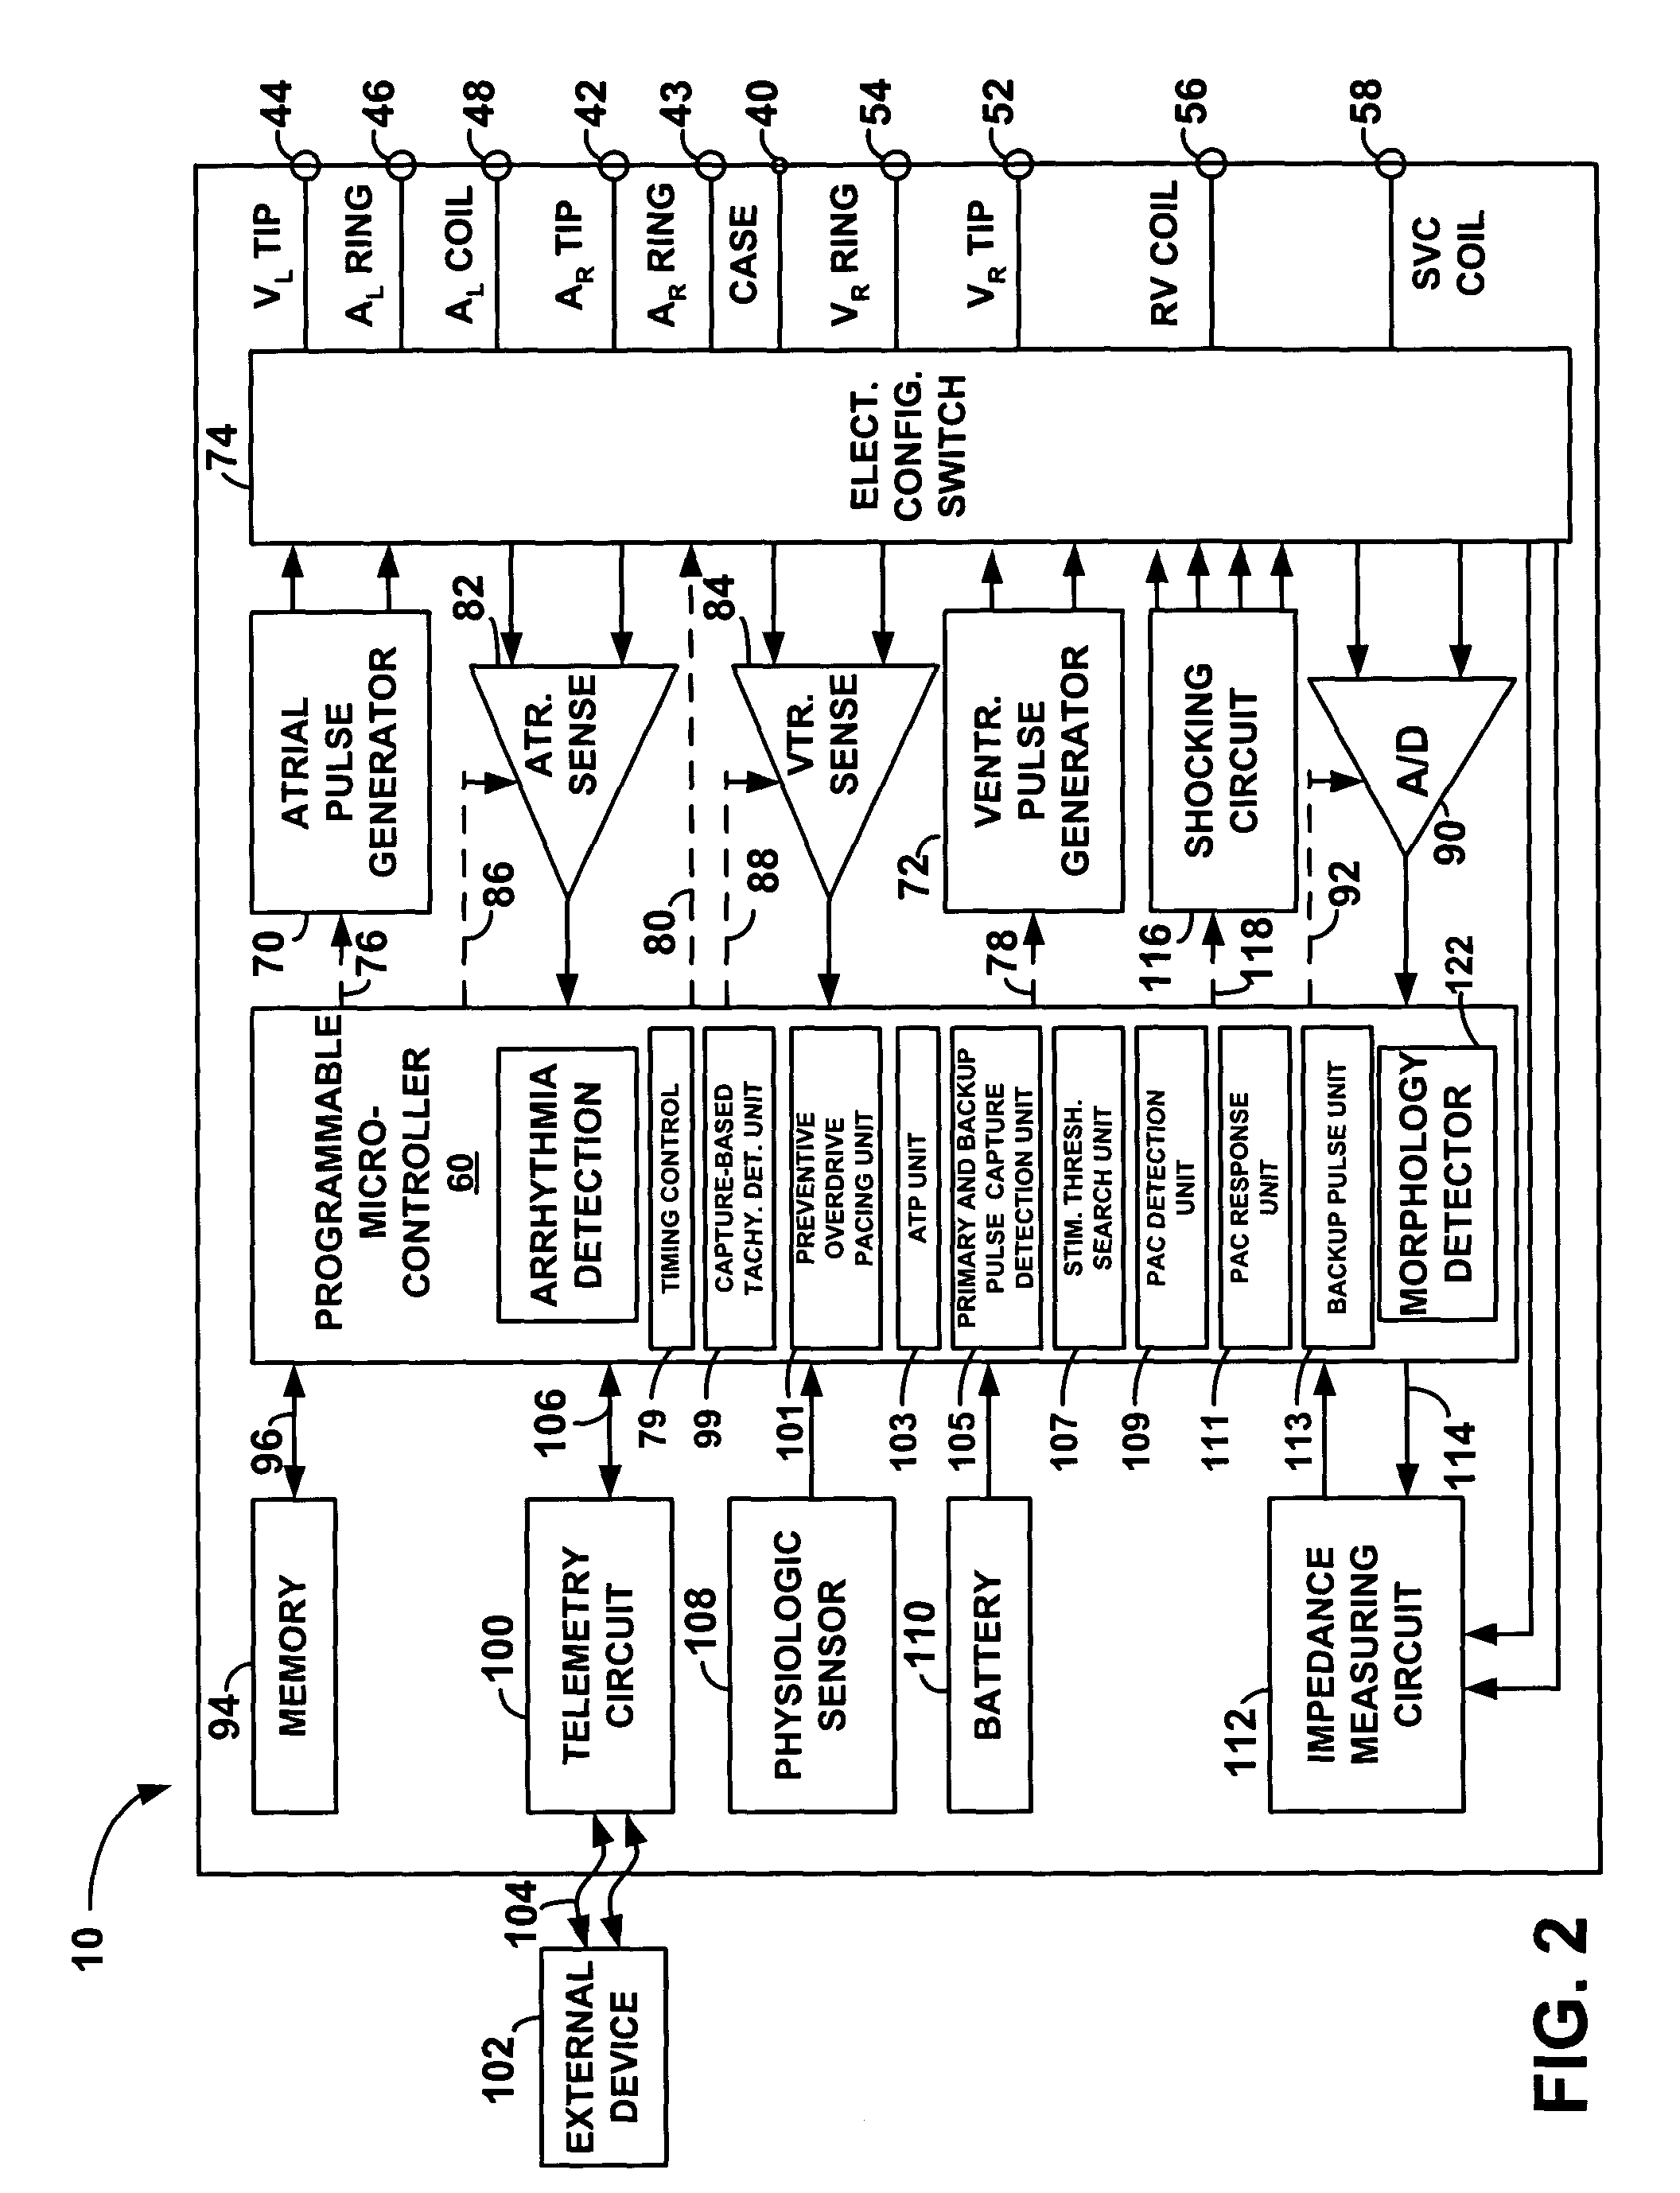 System and method for providing preventive overdrive pacing and antitachycardia pacing using an implantable cardiac stimulation device